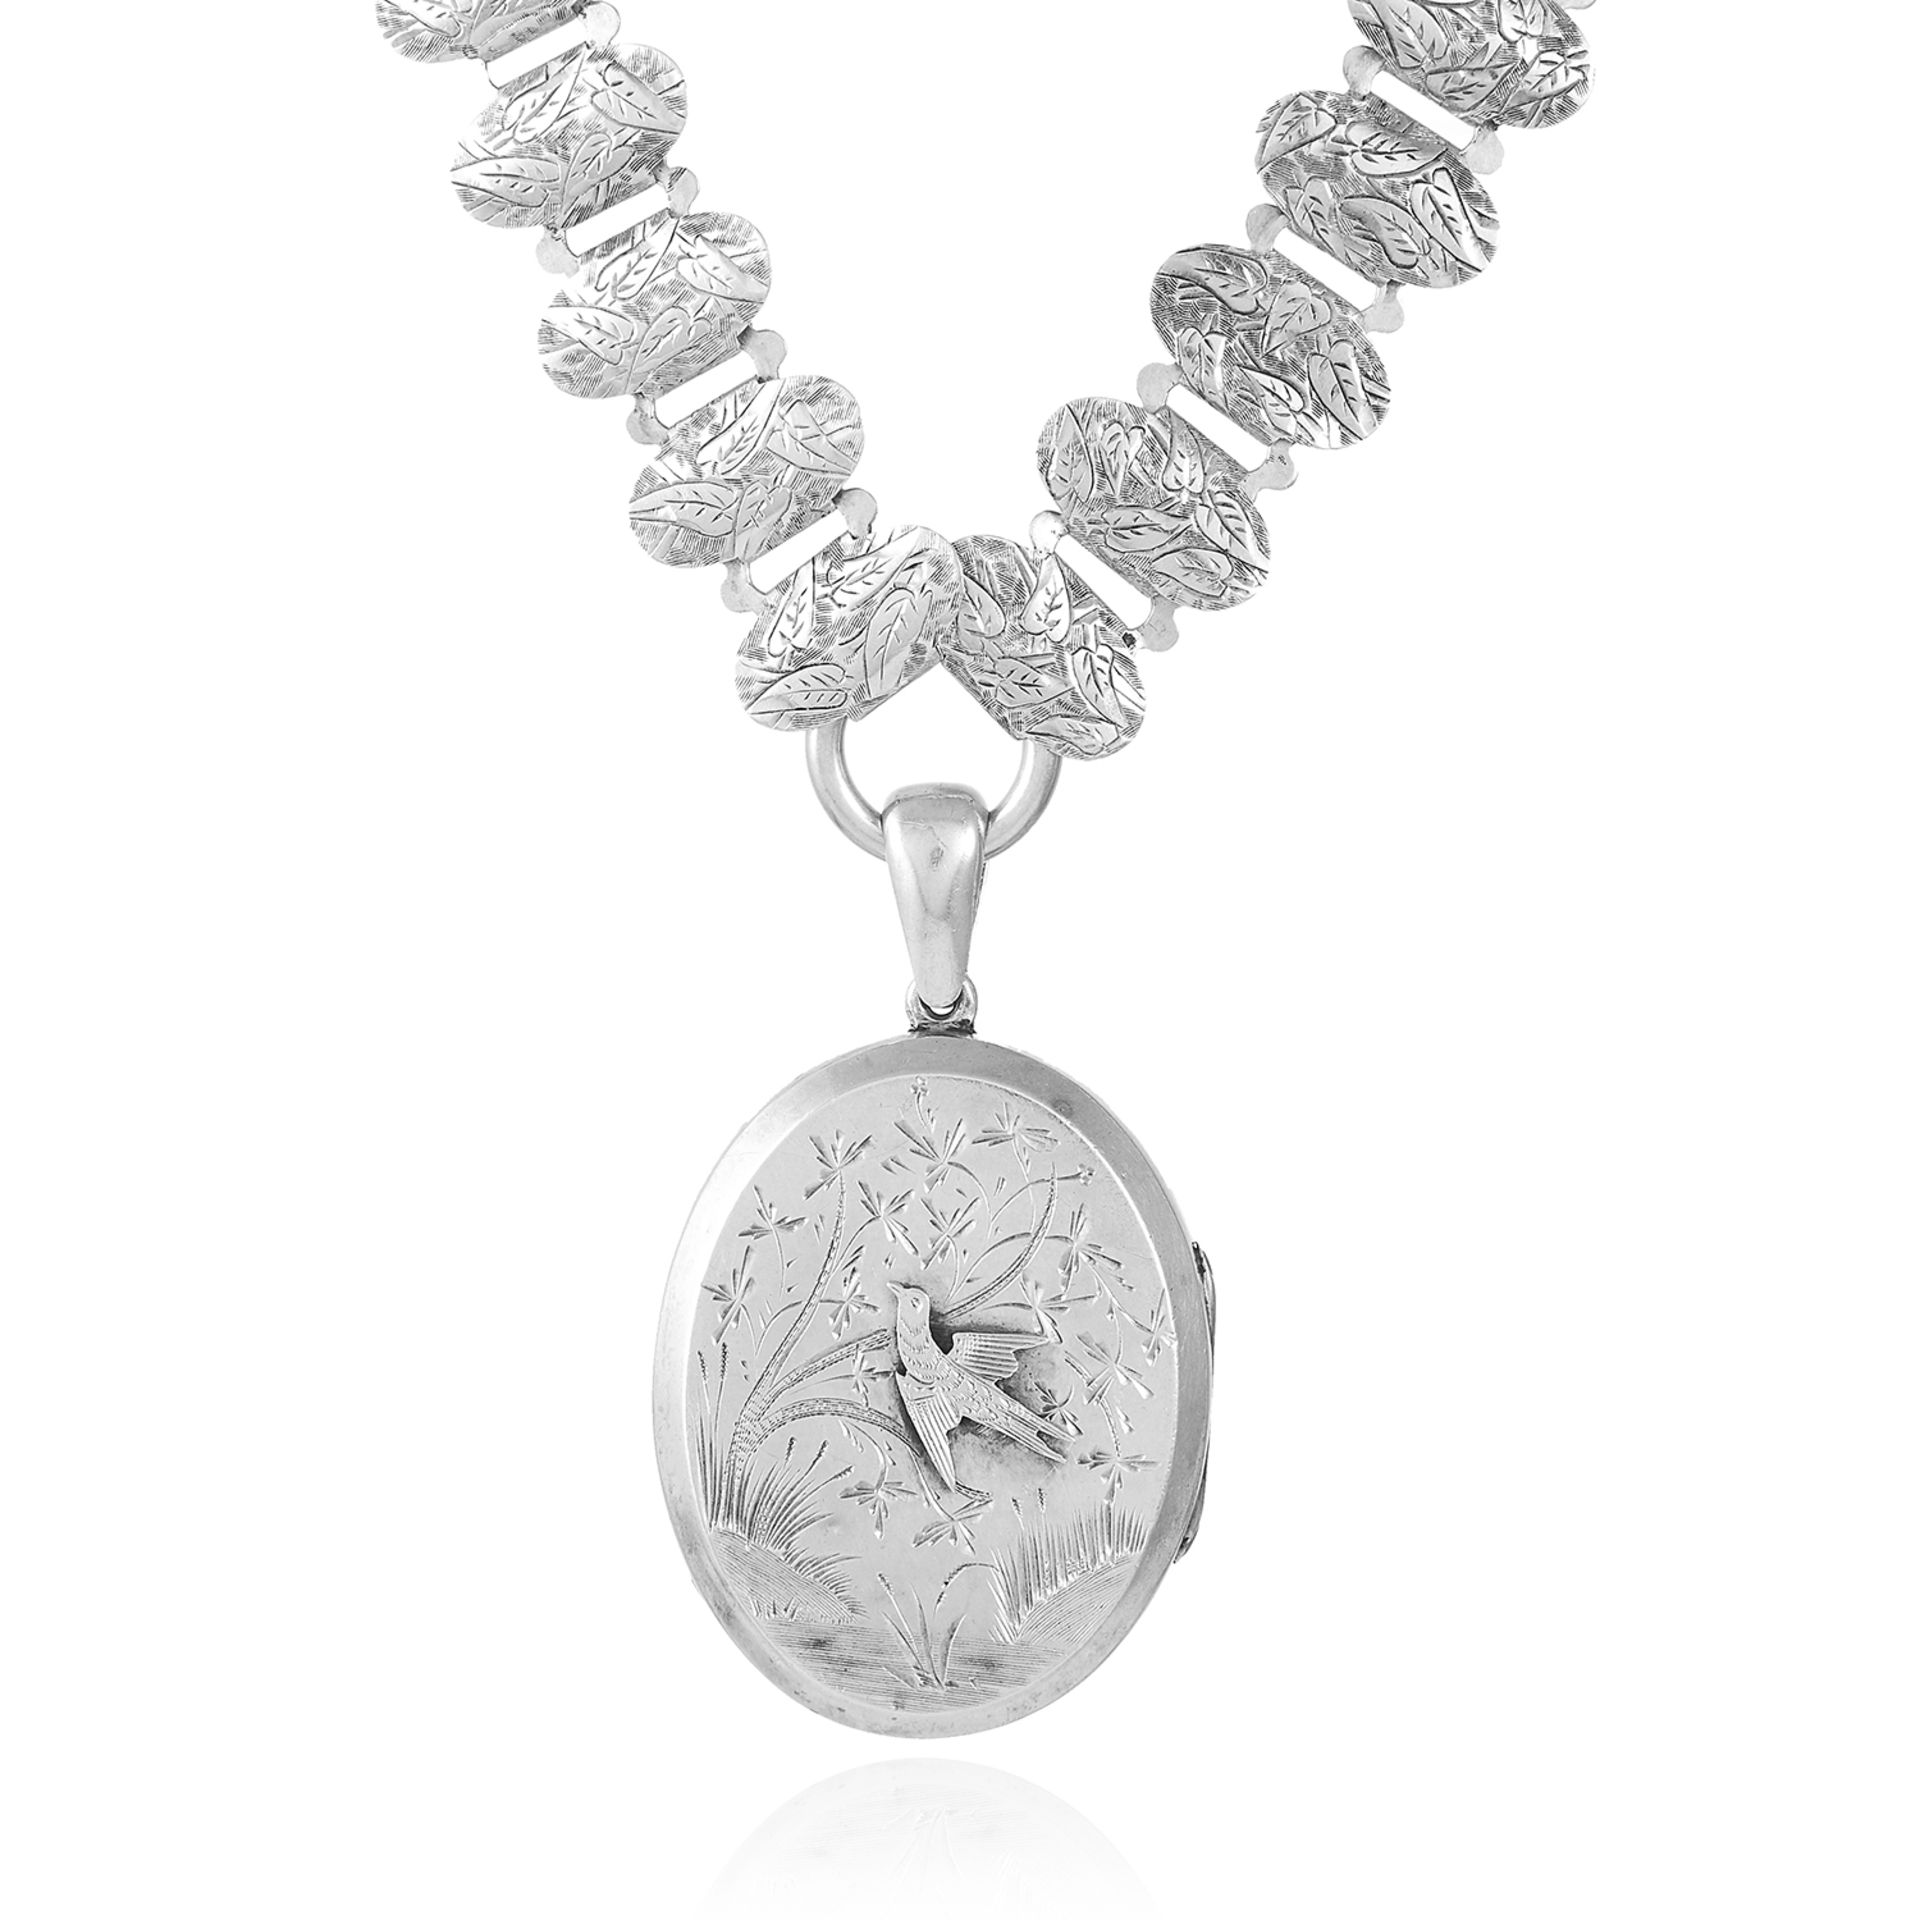 AN ANTIQUE LOCKET NECKLACE in silver, formed off an oval link chain with an engraved Japanese